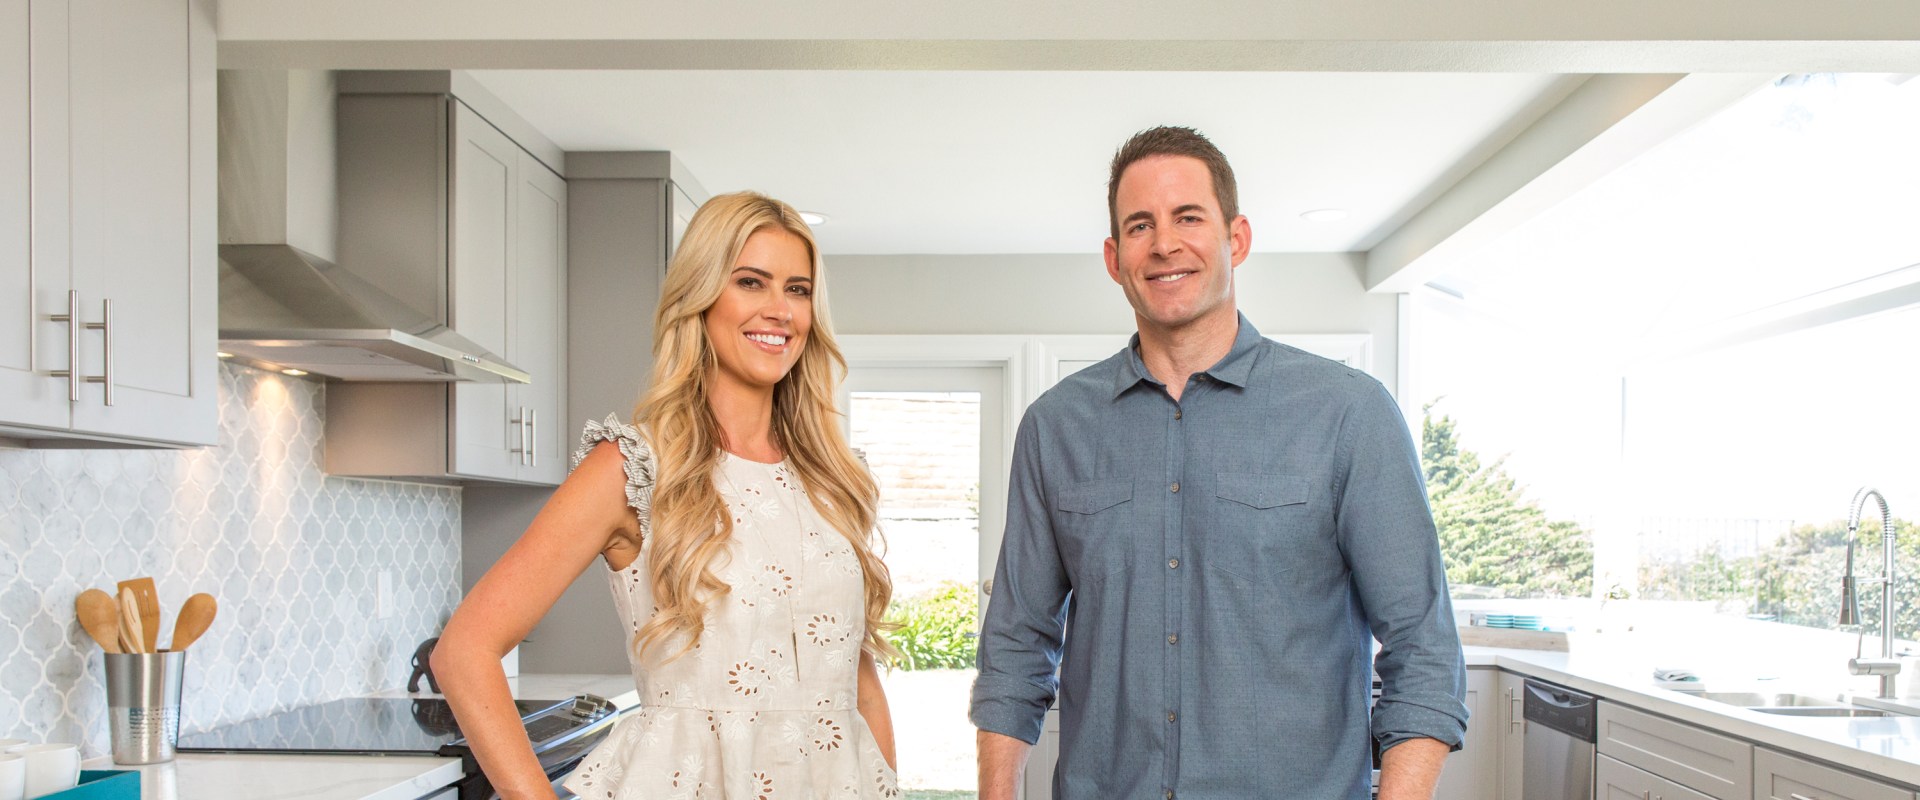 Is HGTV Real? Uncovering the Truth Behind Popular Home Shows